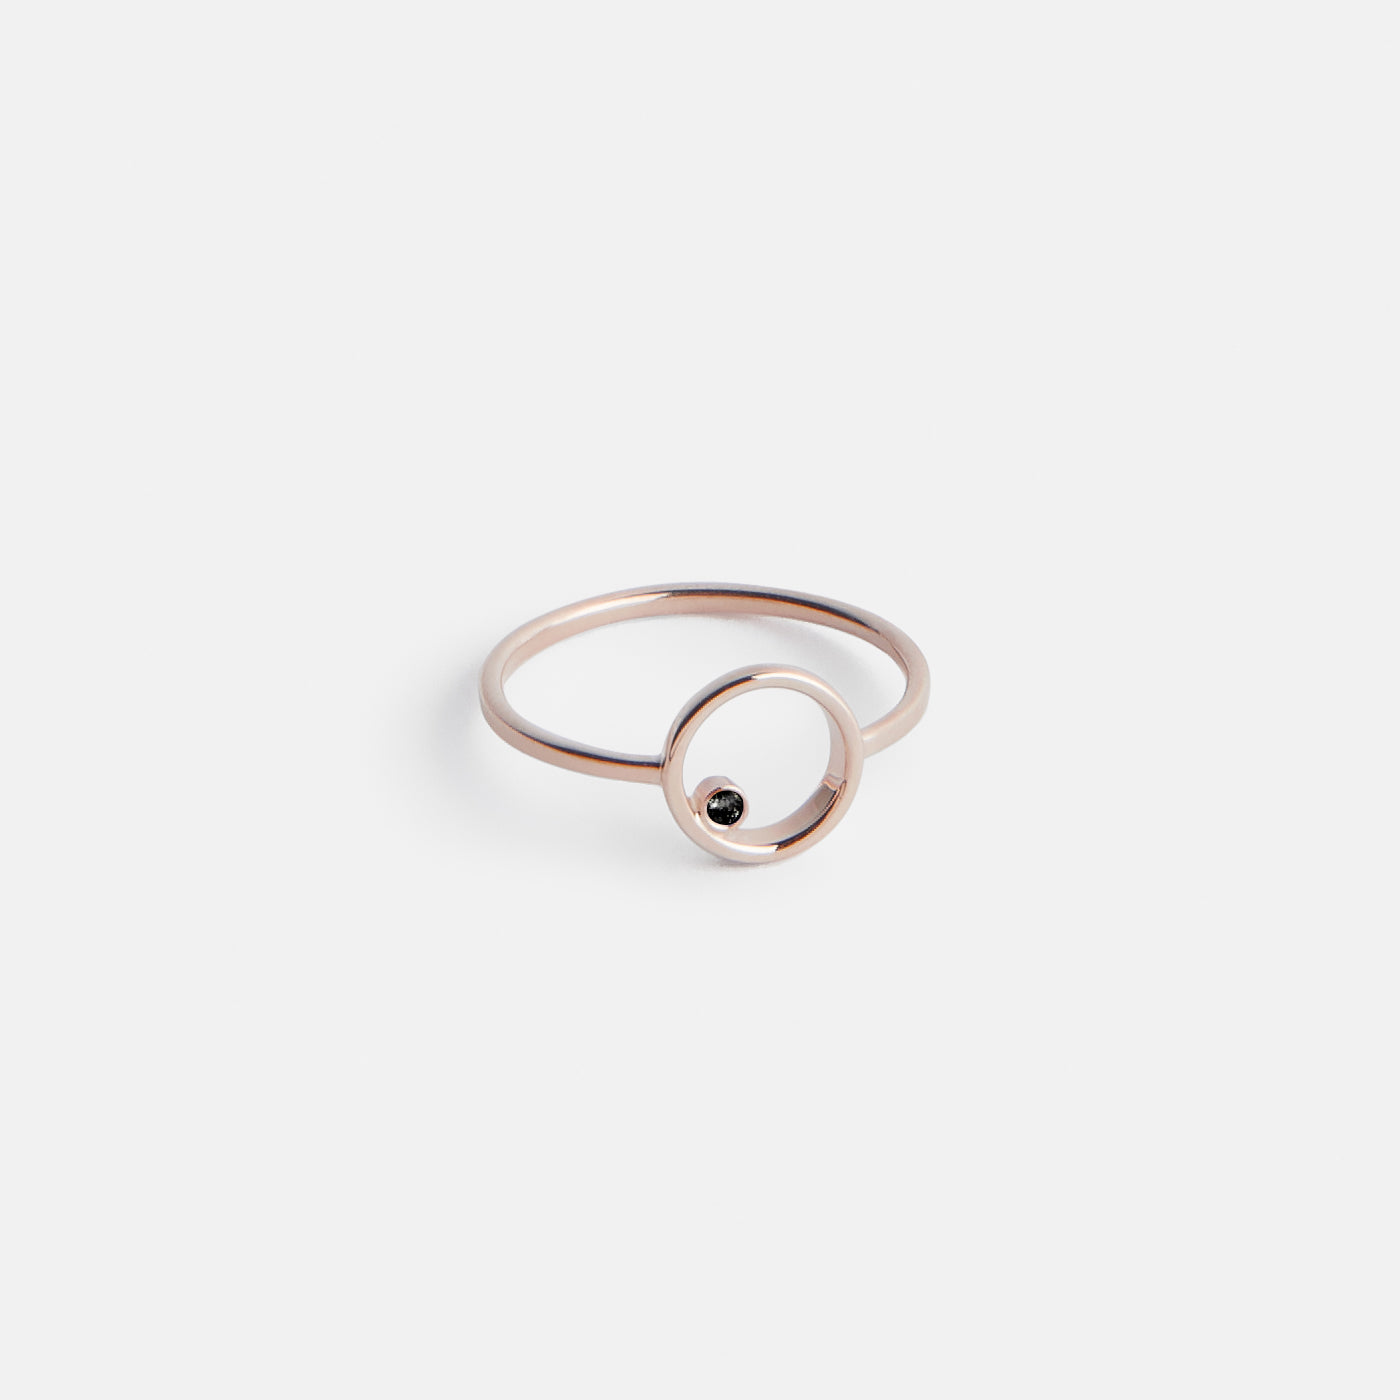 Ila Delicate Ring in 14k Rose Gold set with Black Diamond by SHW Fine Jewelry NYC